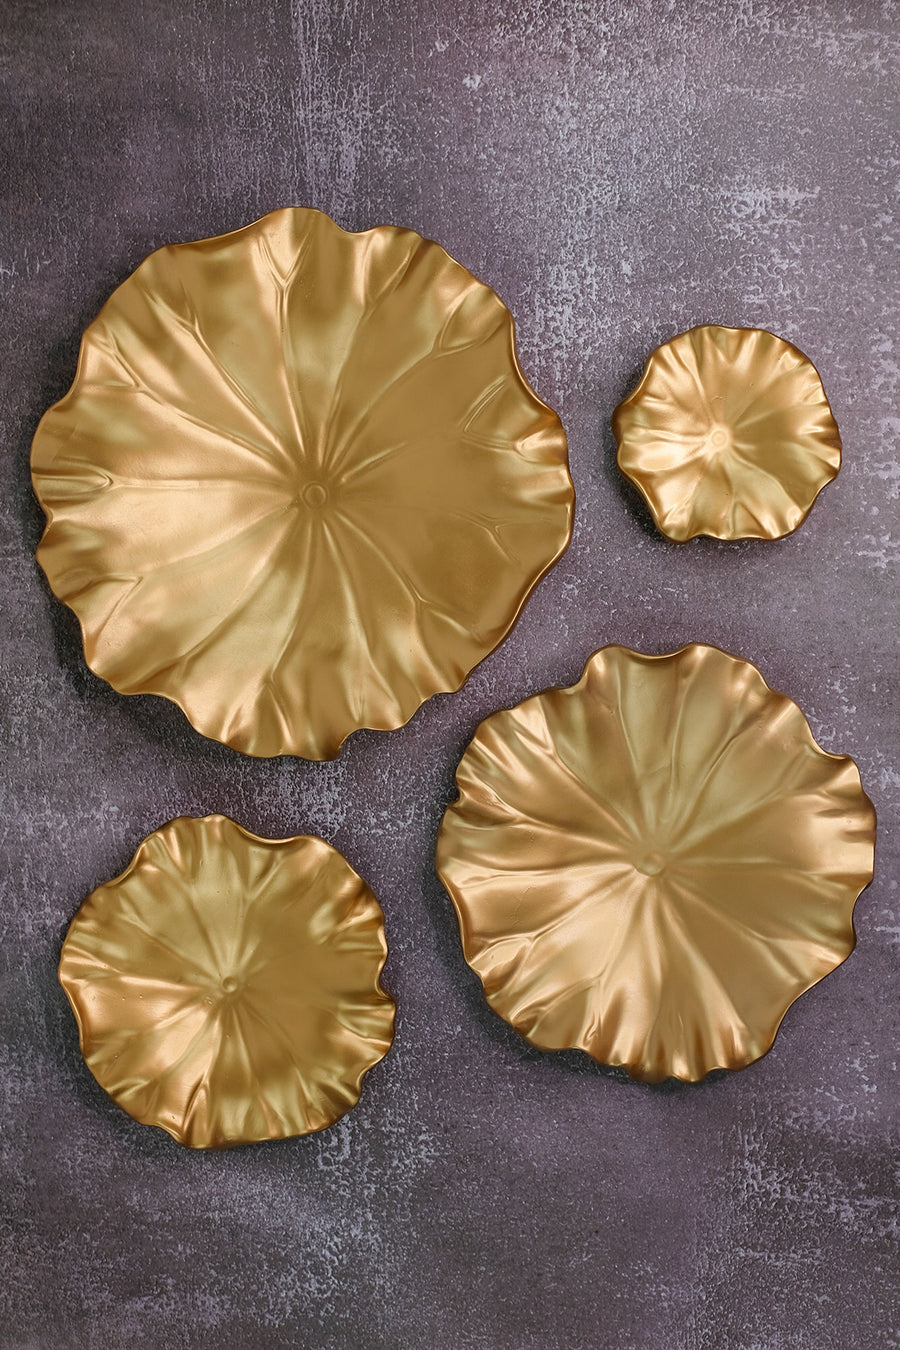 Lotus Leaves Wall Decor set in Gold